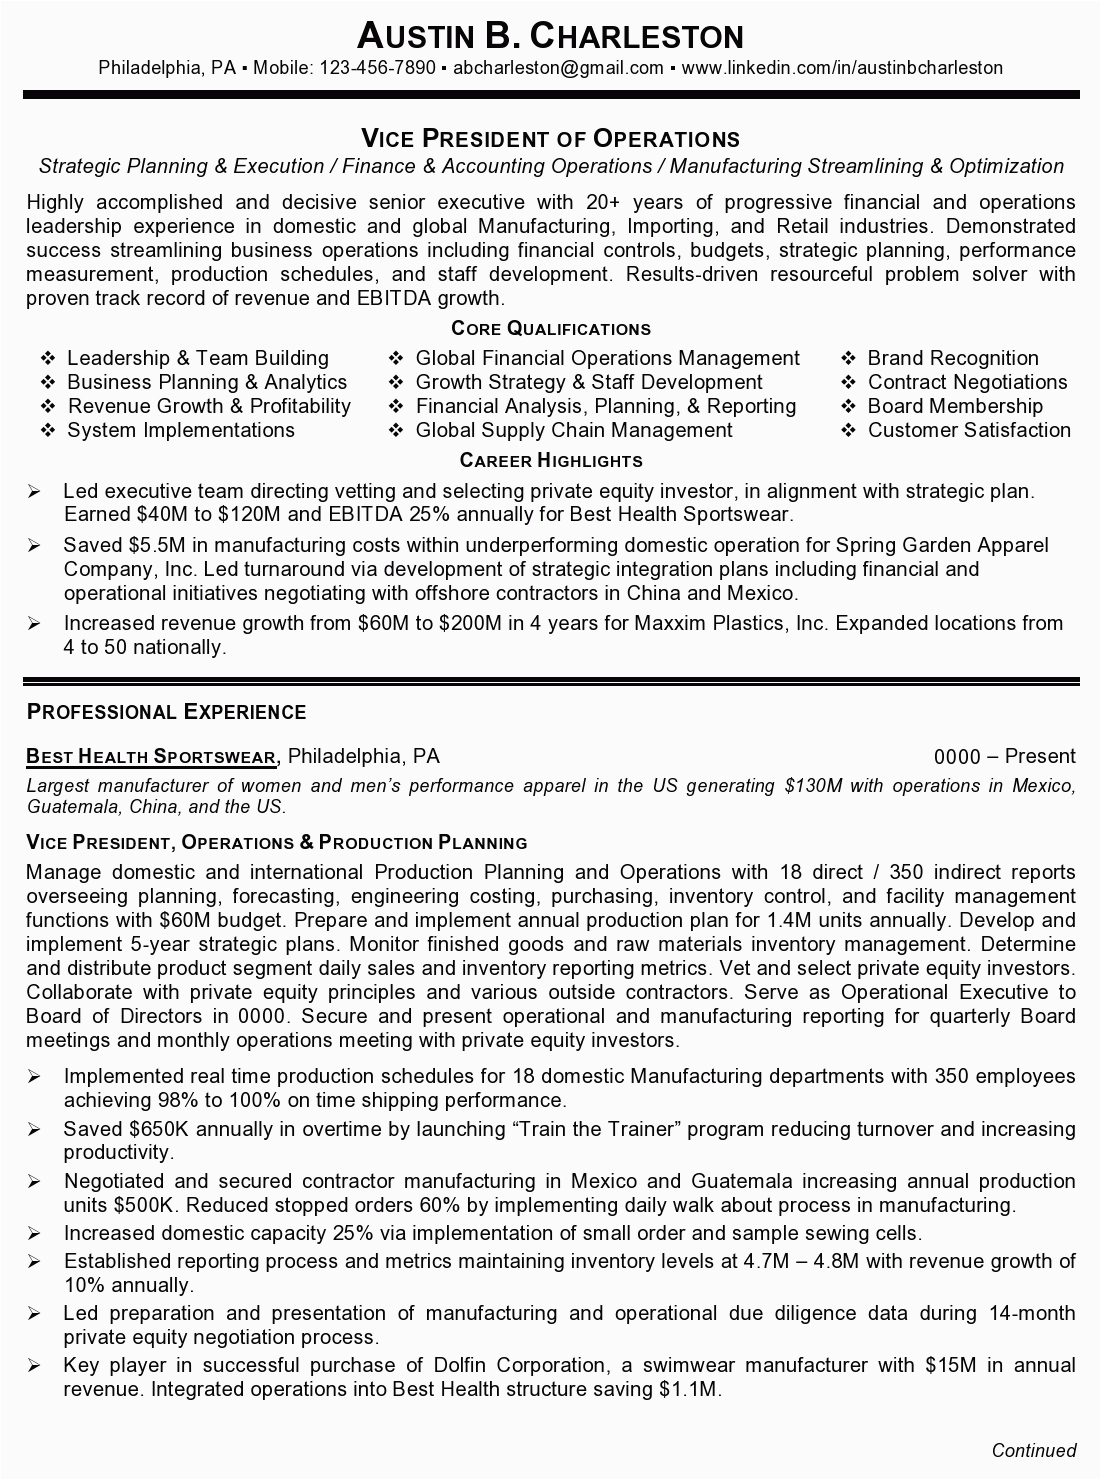 Sample Resume for Vice President Of Operations Resume Sample 4 Vice President Of Operations – Career